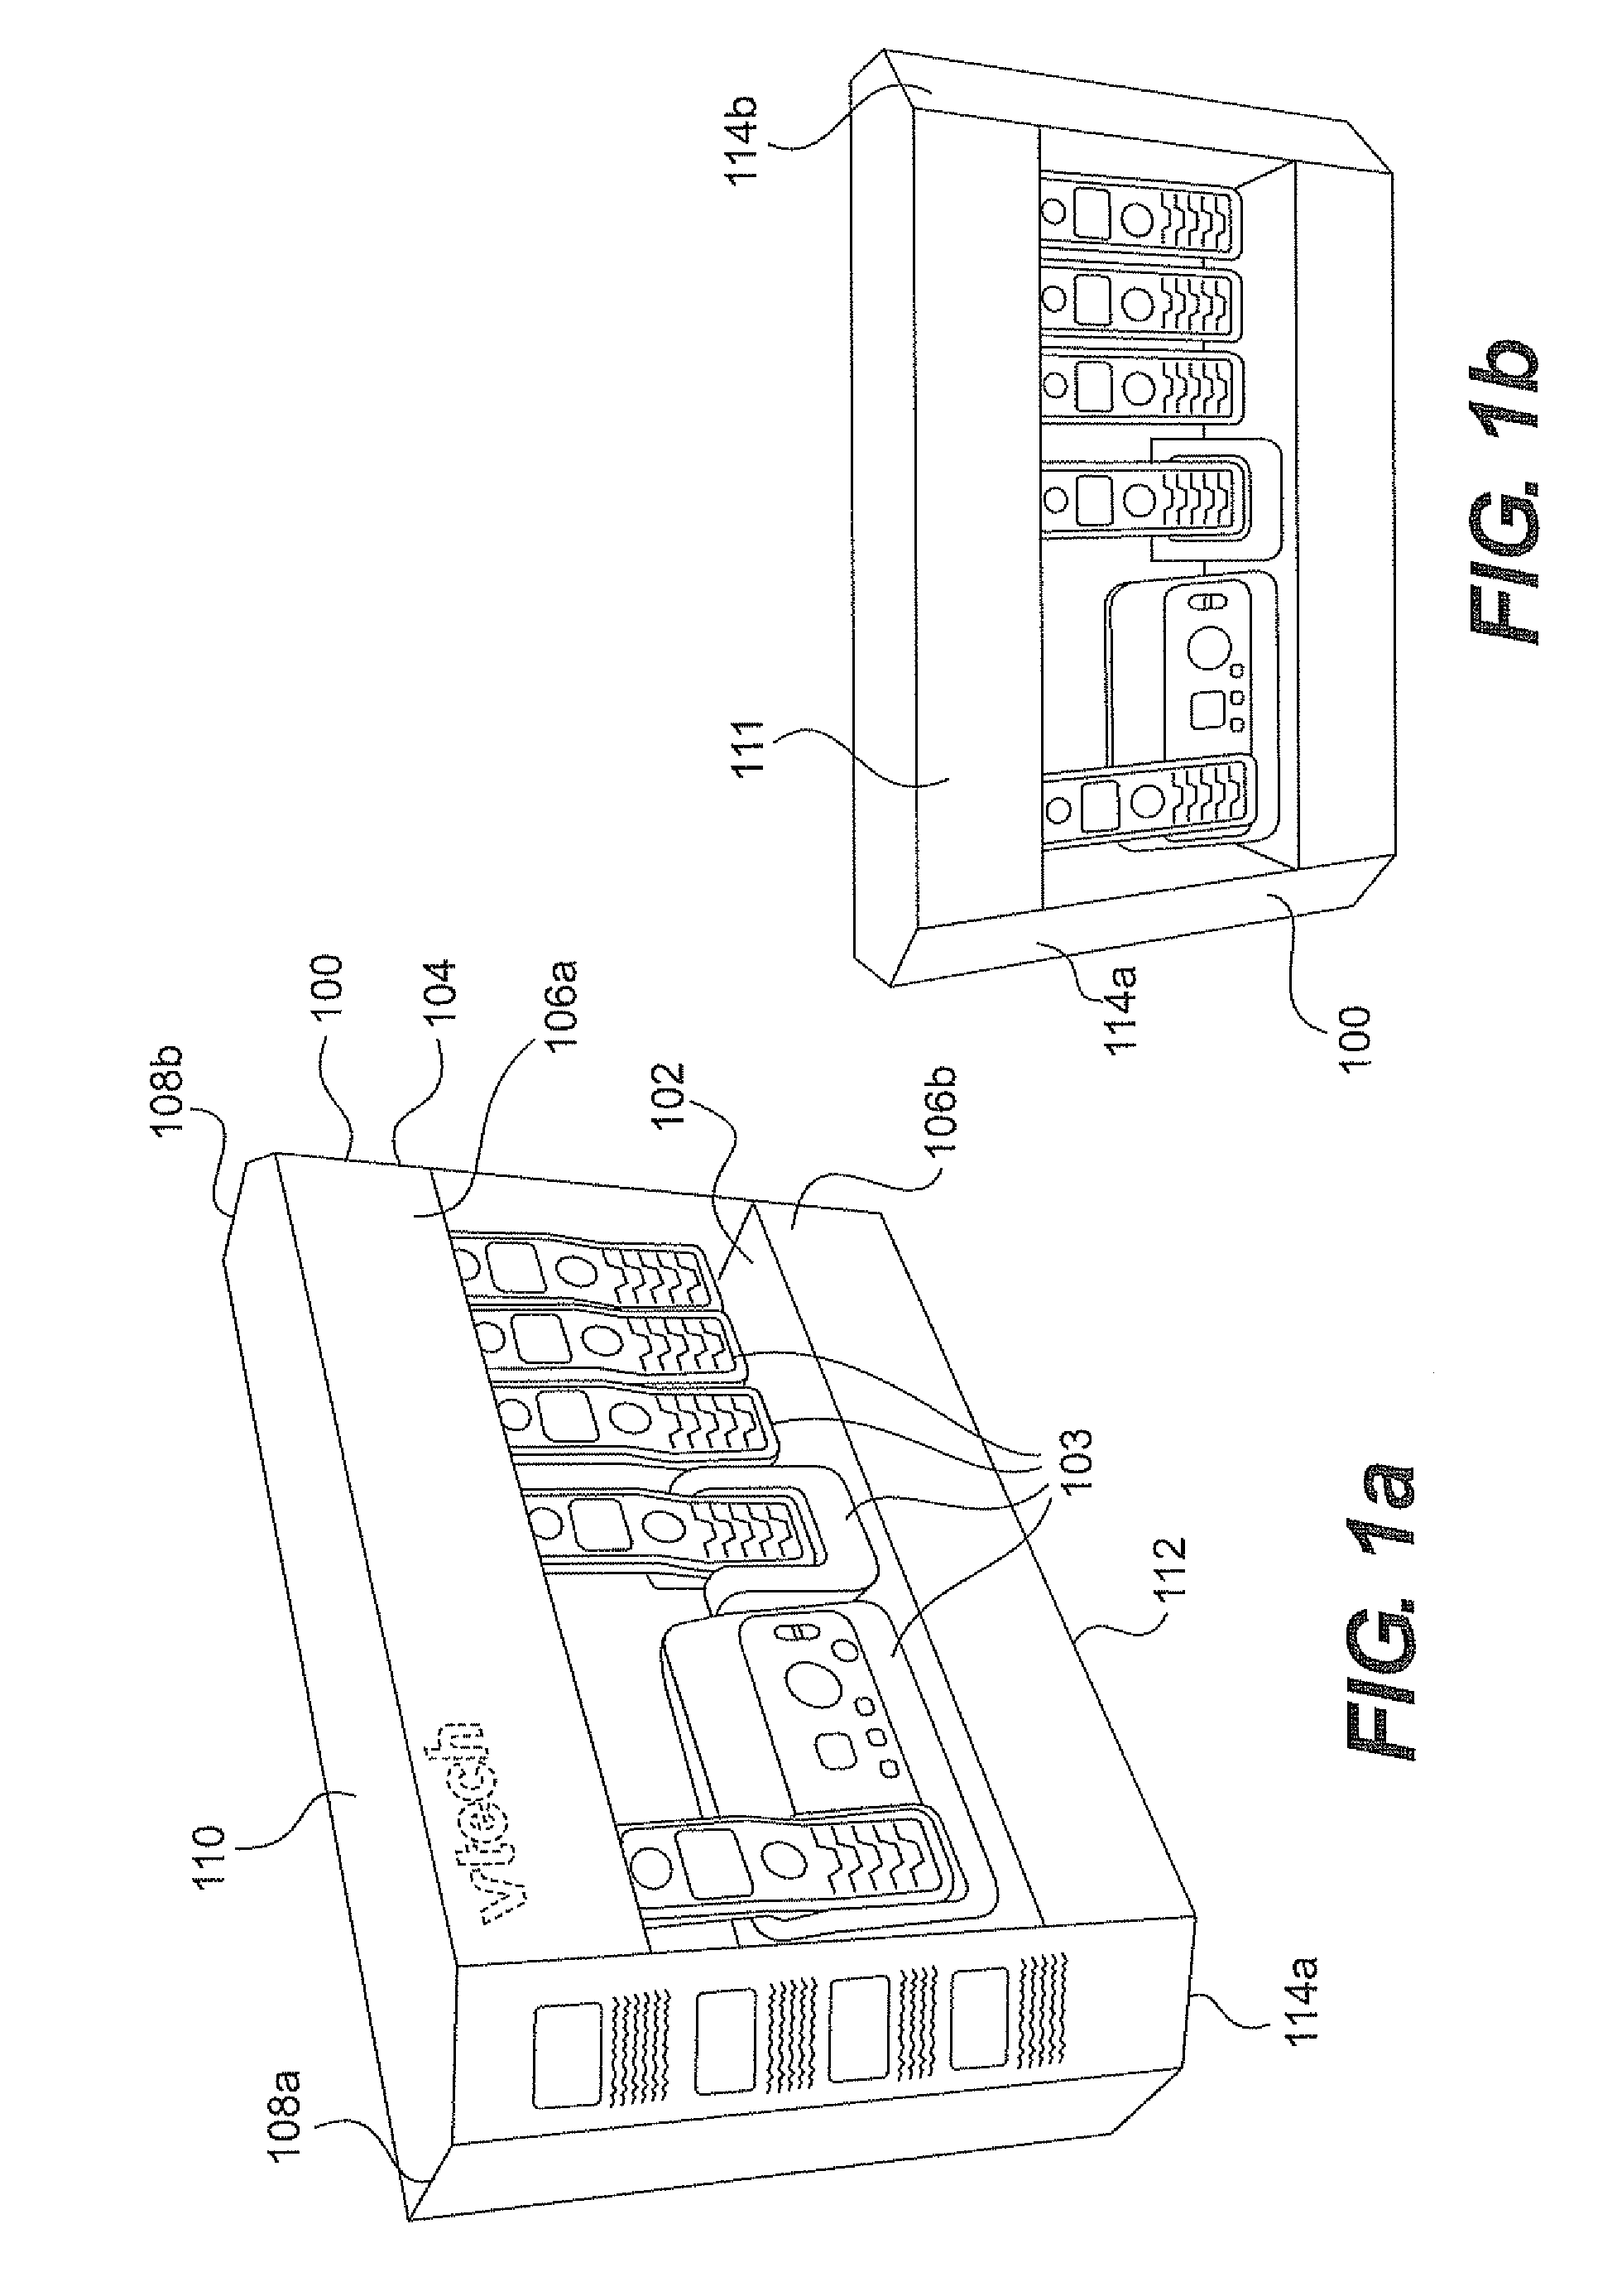 System for product packaging and display